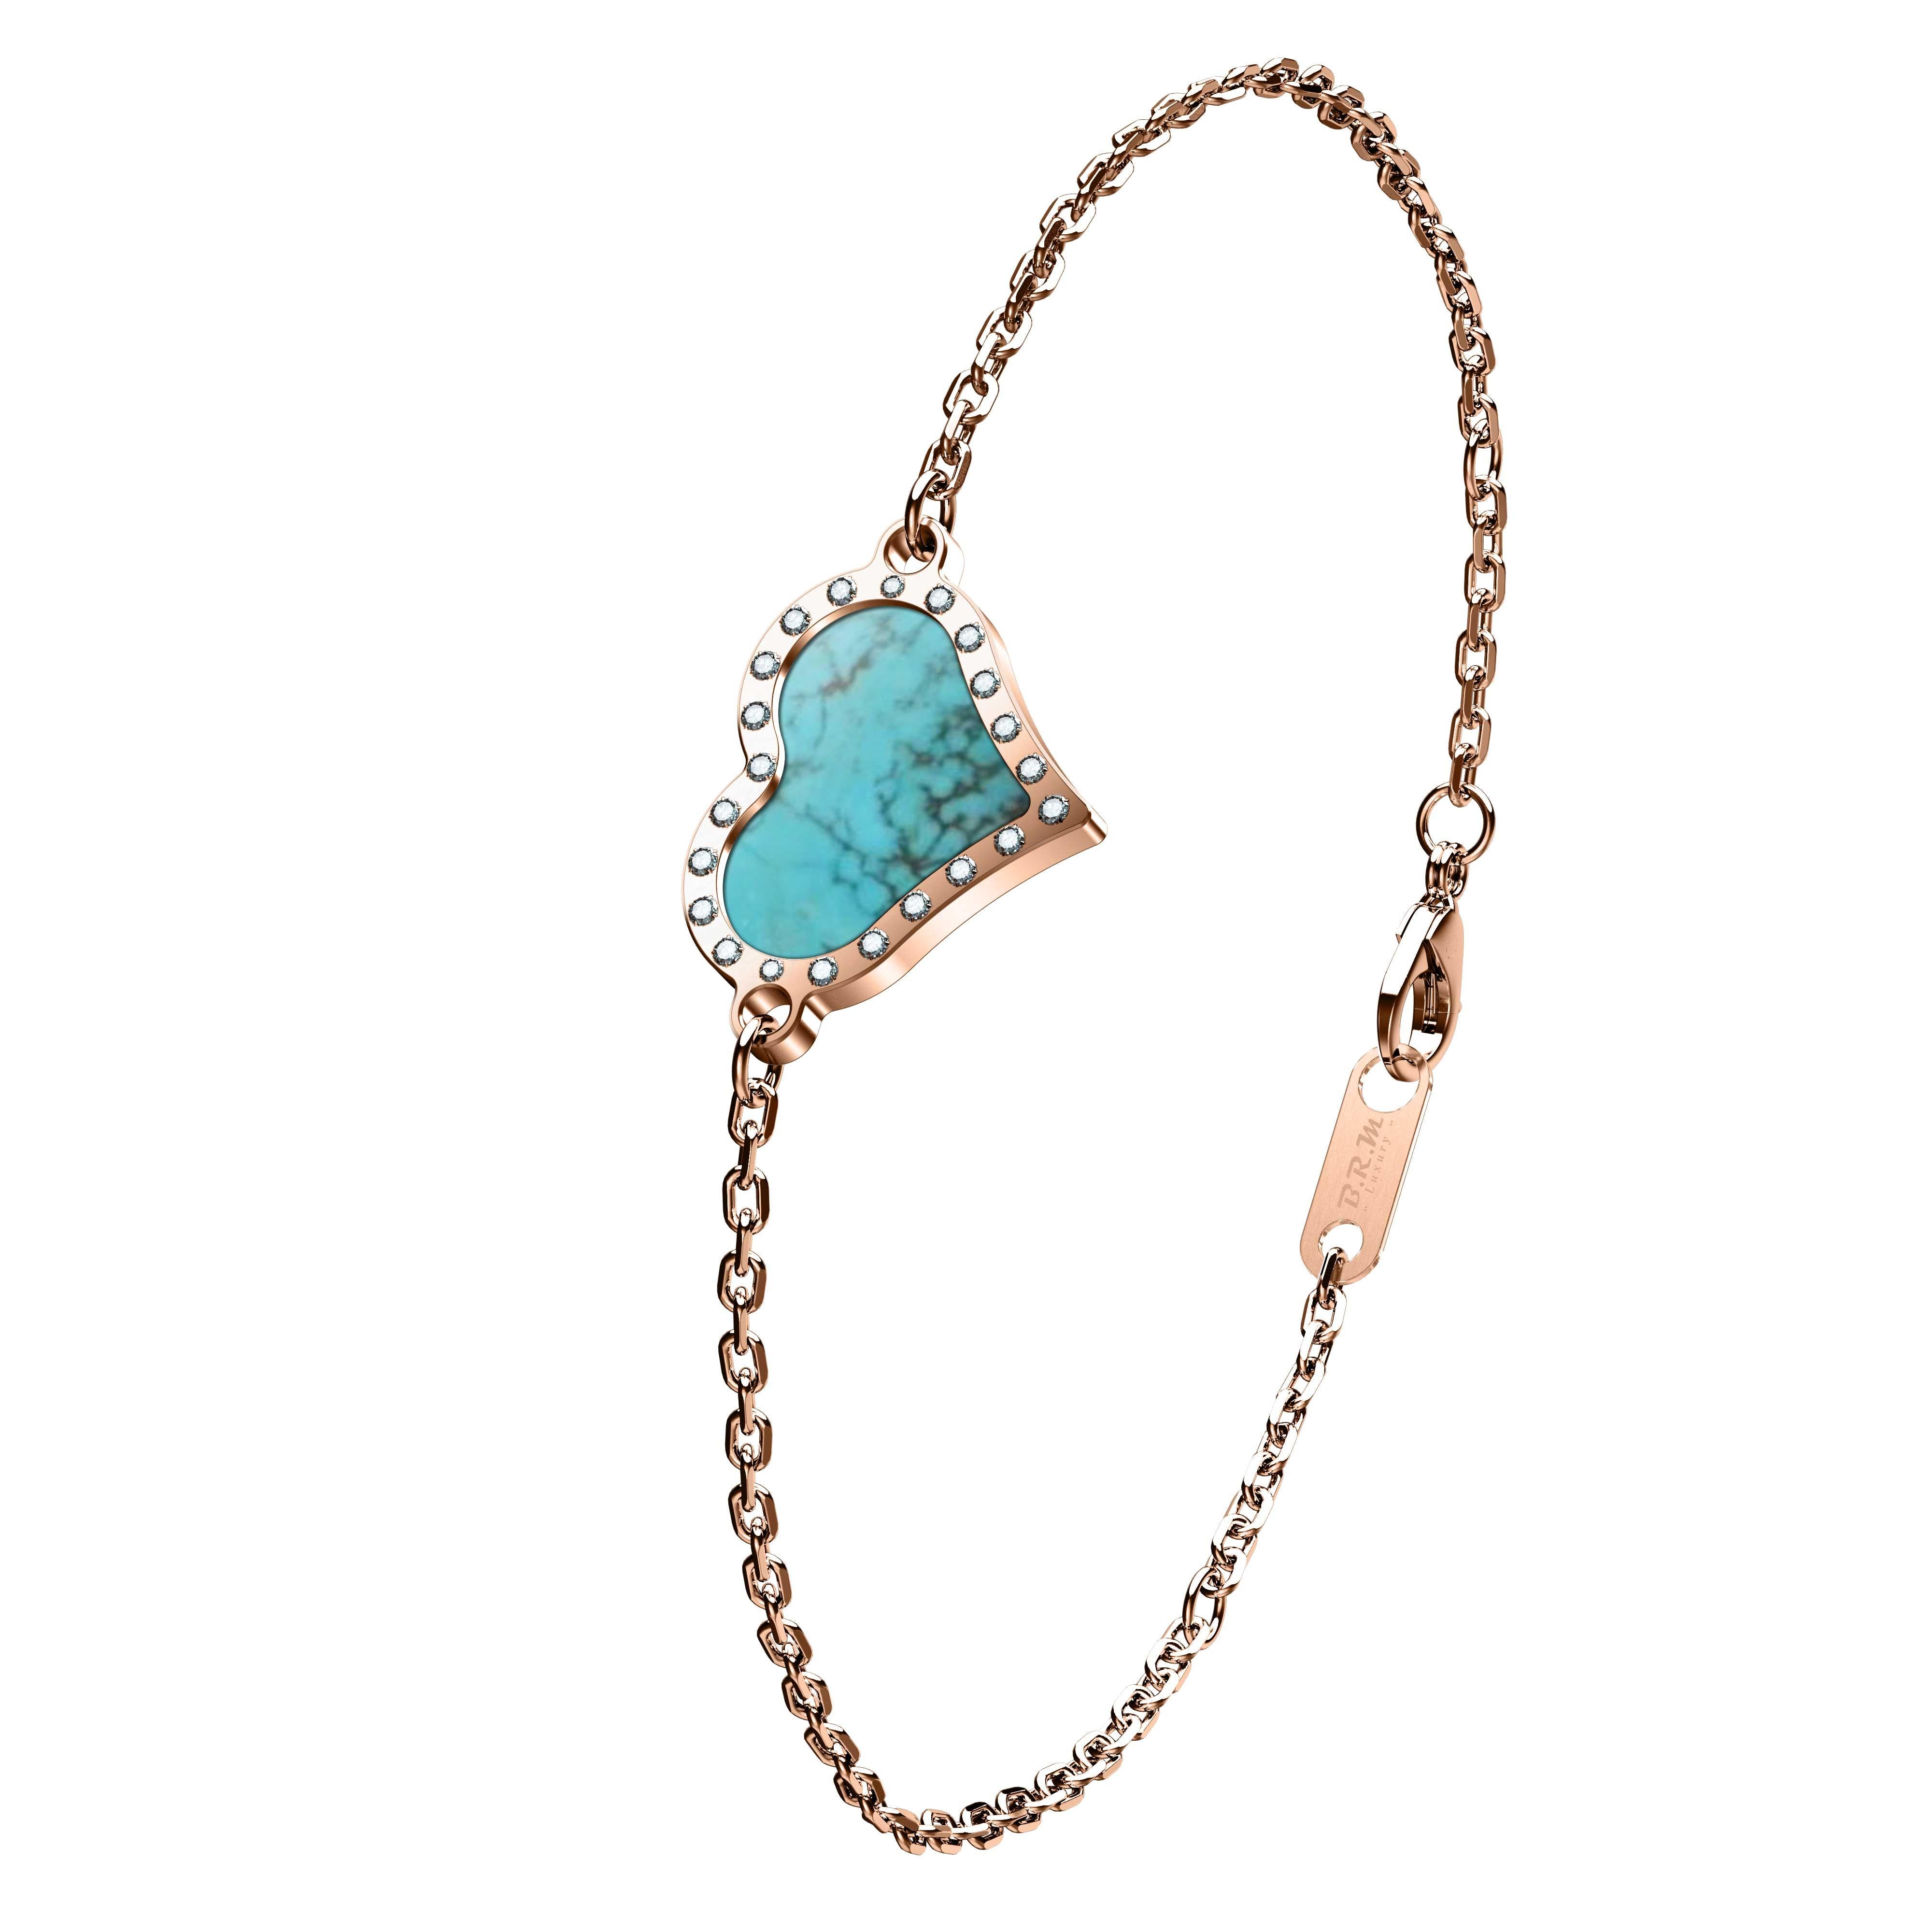 BRM Cœur Bracelet, 18K Rose Gold in Heart, Chain, Diamonds and Turquoise Stone For Sale